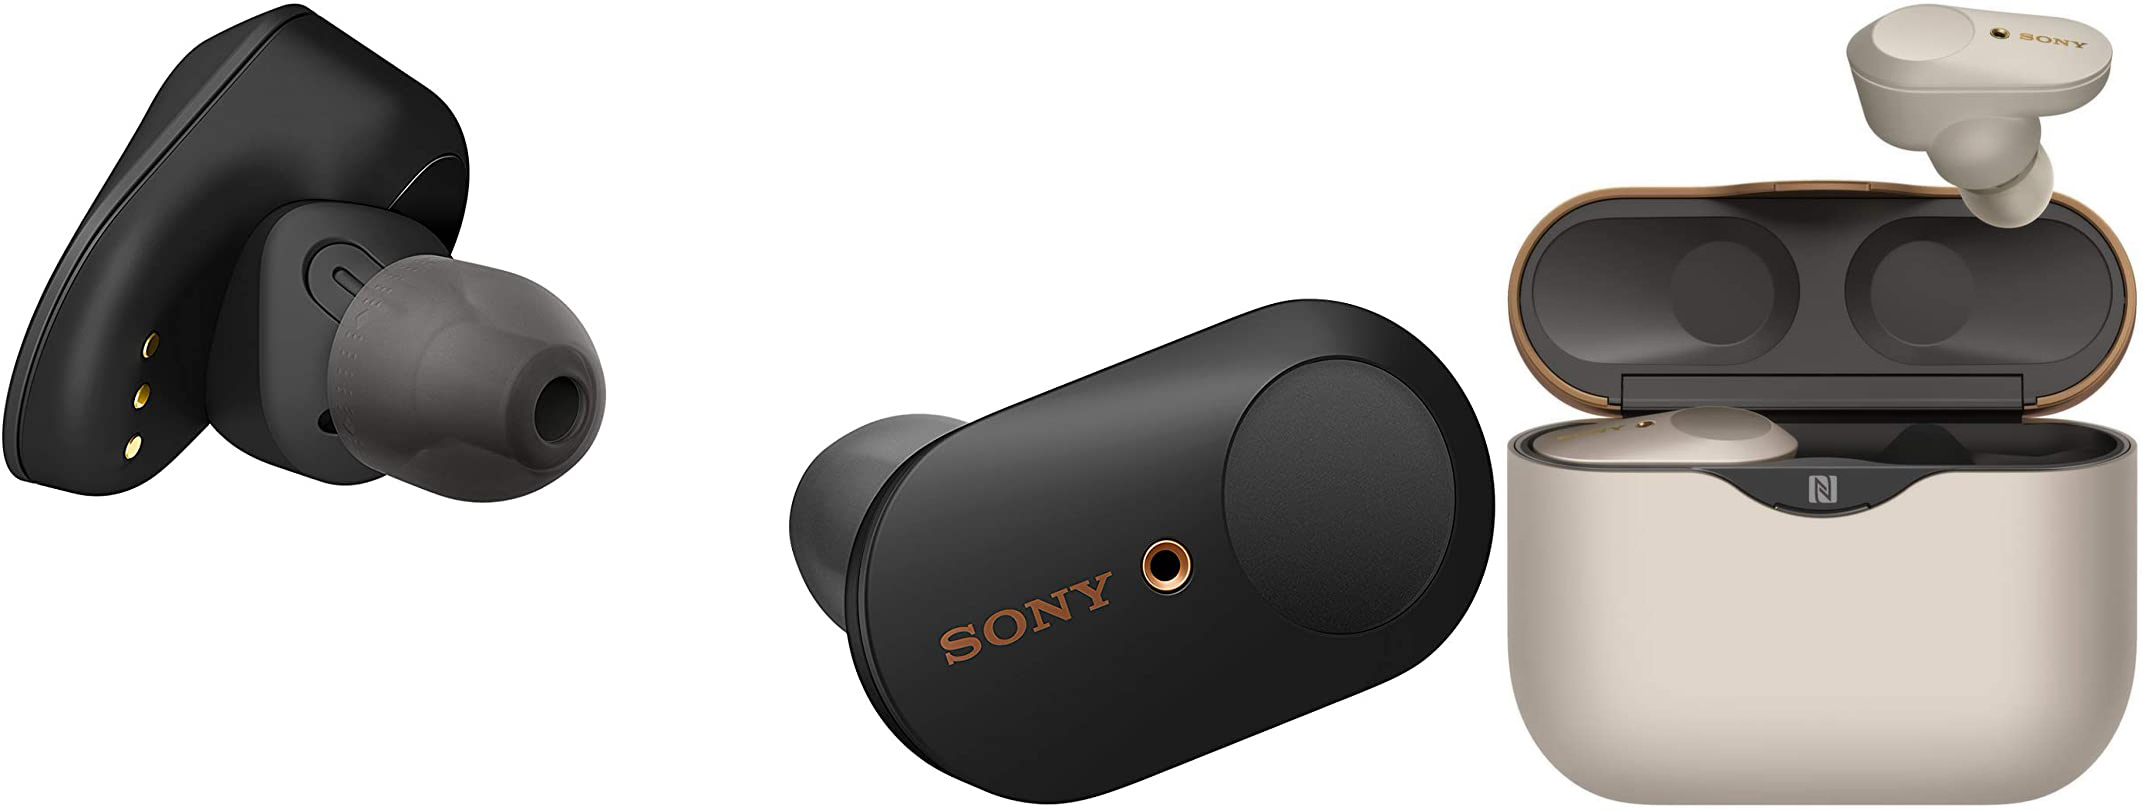 Sony WF-1000XM3 truly wireless ANC earbuds are on sale for $158